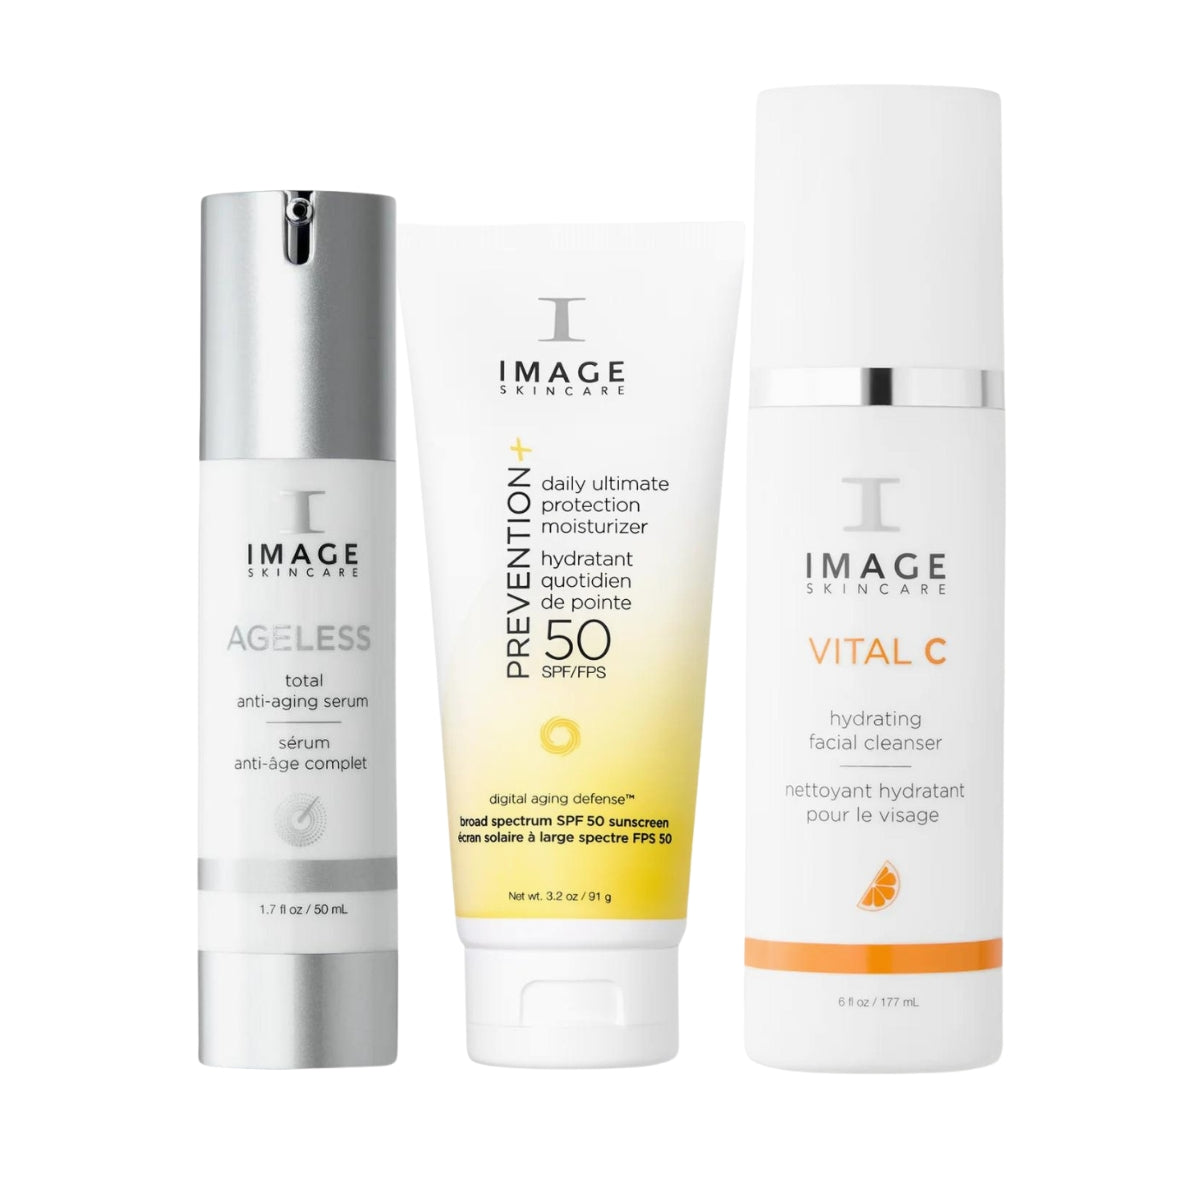 IMAGE Skincare Smooth & Firm Solution Bundle